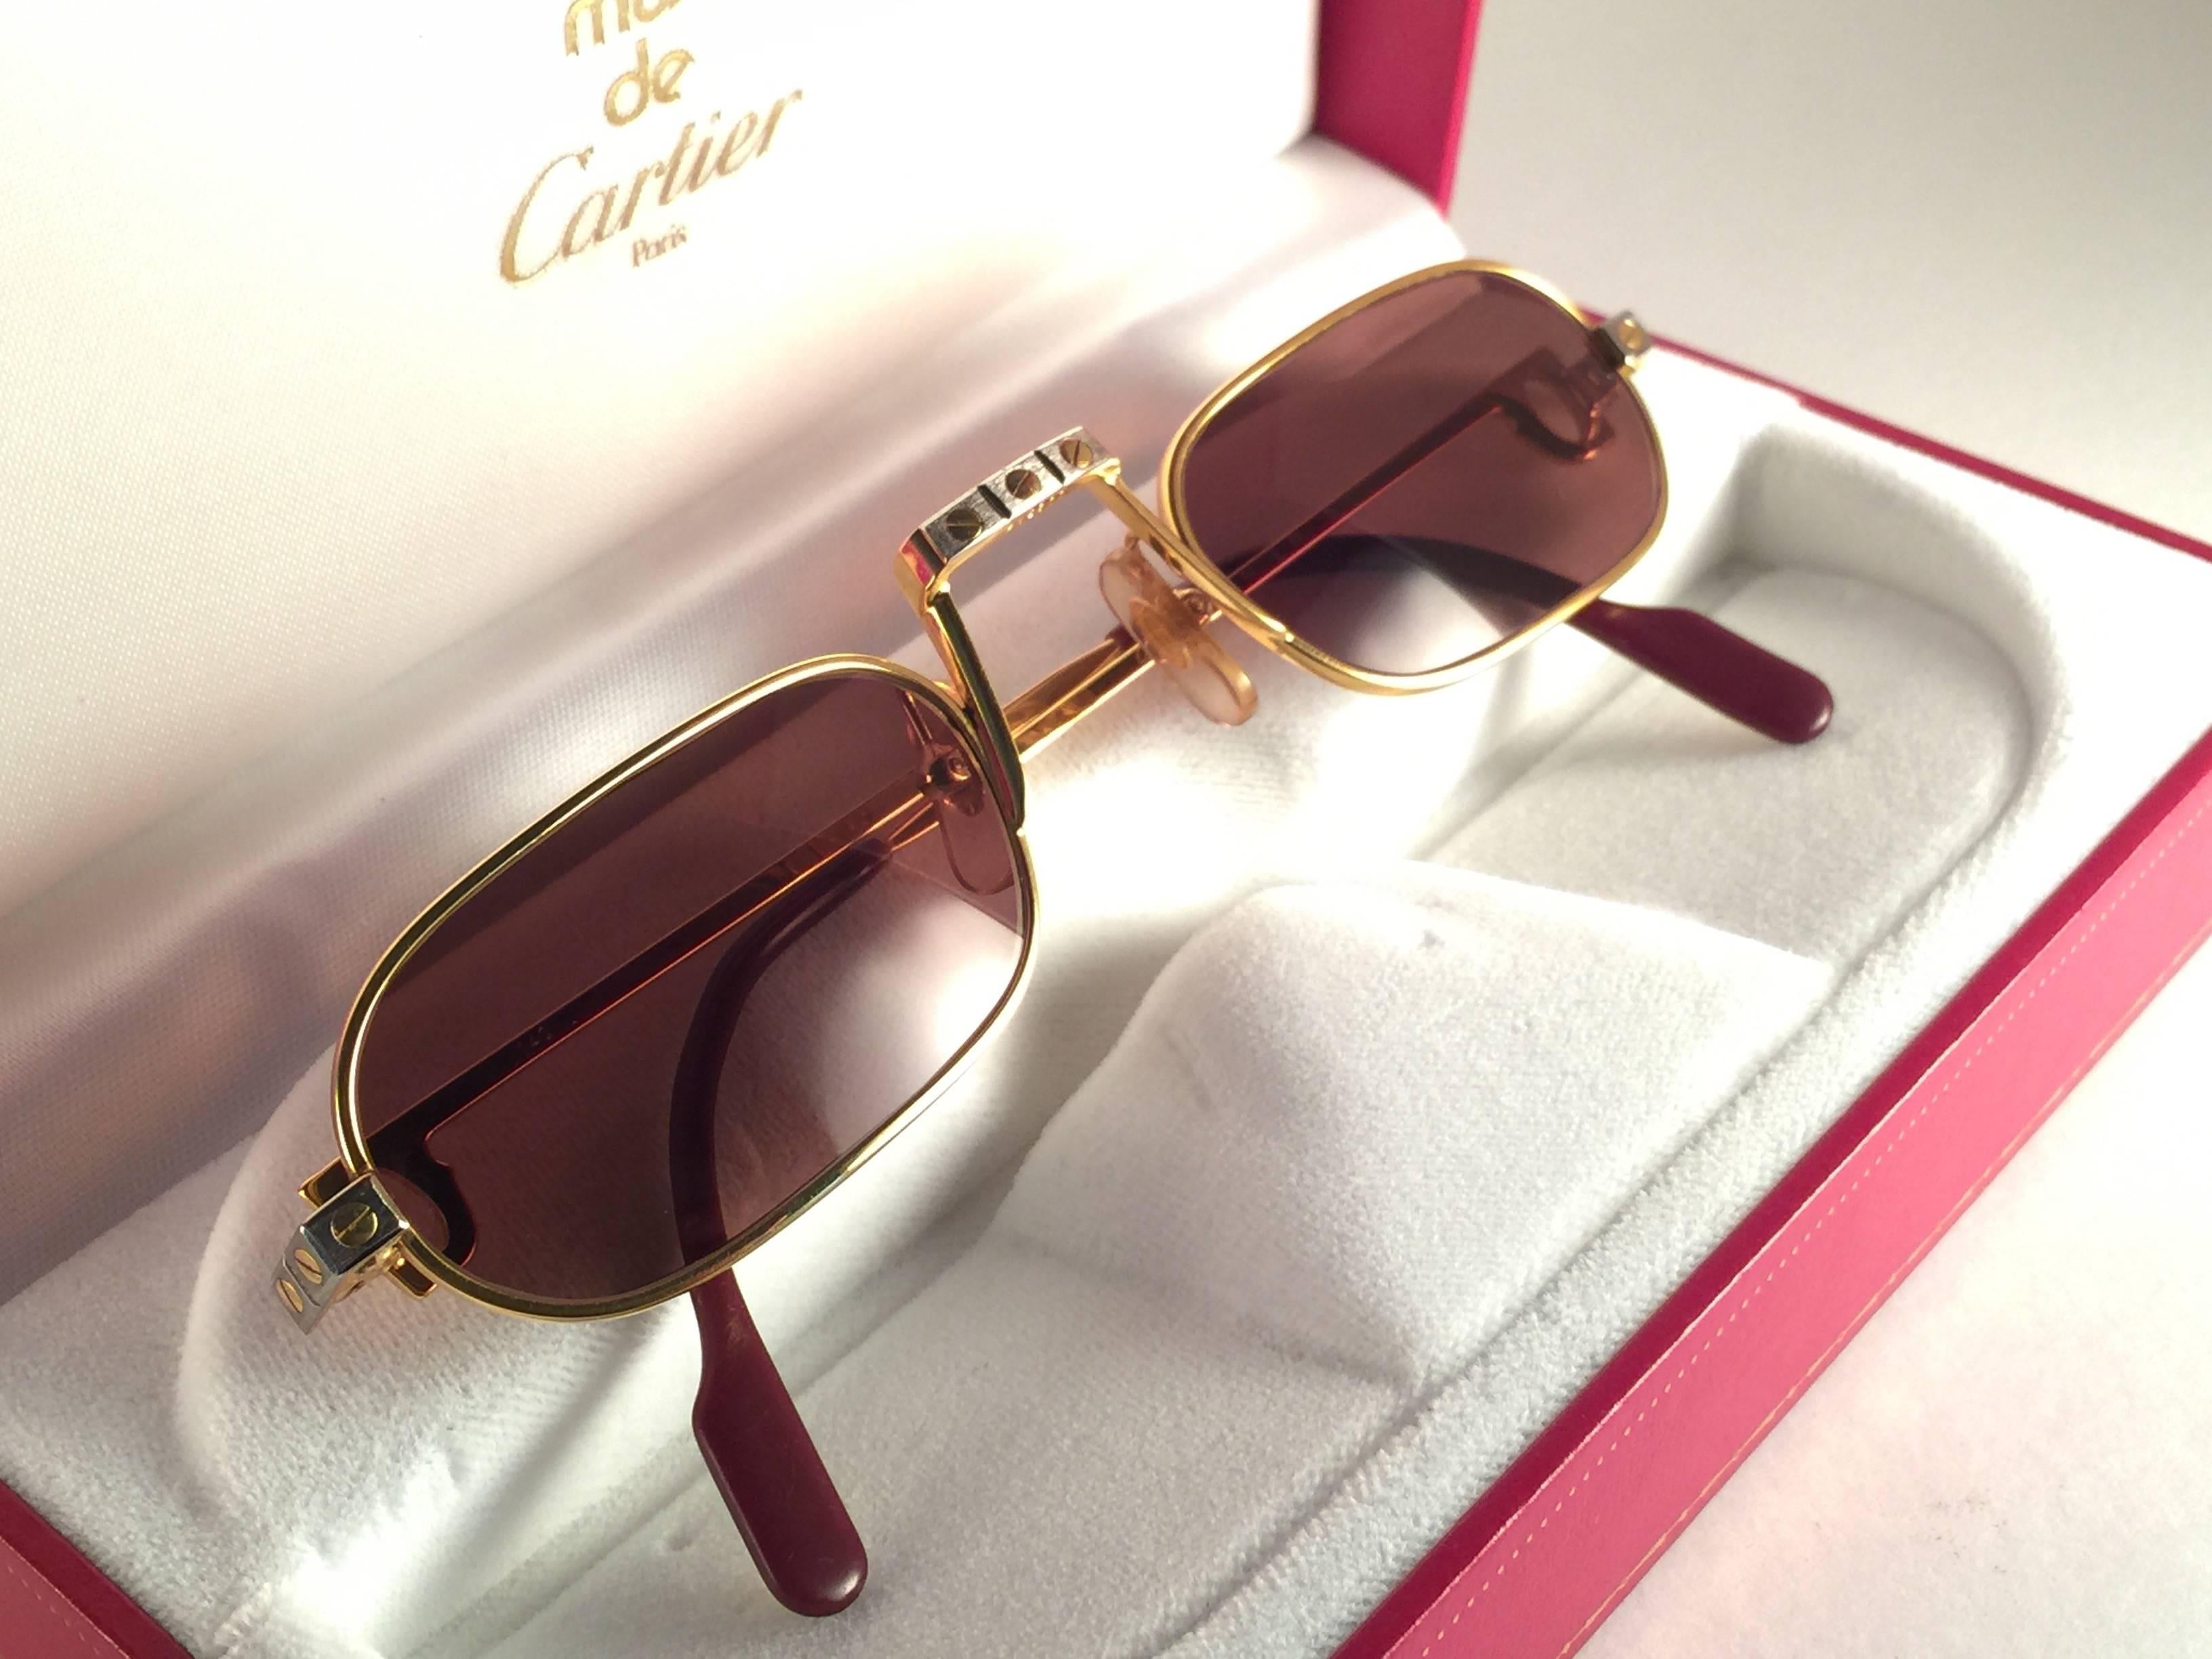 Original 1983 Cartier Demilune Cartier Santos sunglasses with new honey brown lenses. Very comfortable as reading glasses. All hallmarks. Red enamel with Cartier gold signs on the burgundy ear paddles. Both arms sport the C from Cartier on the